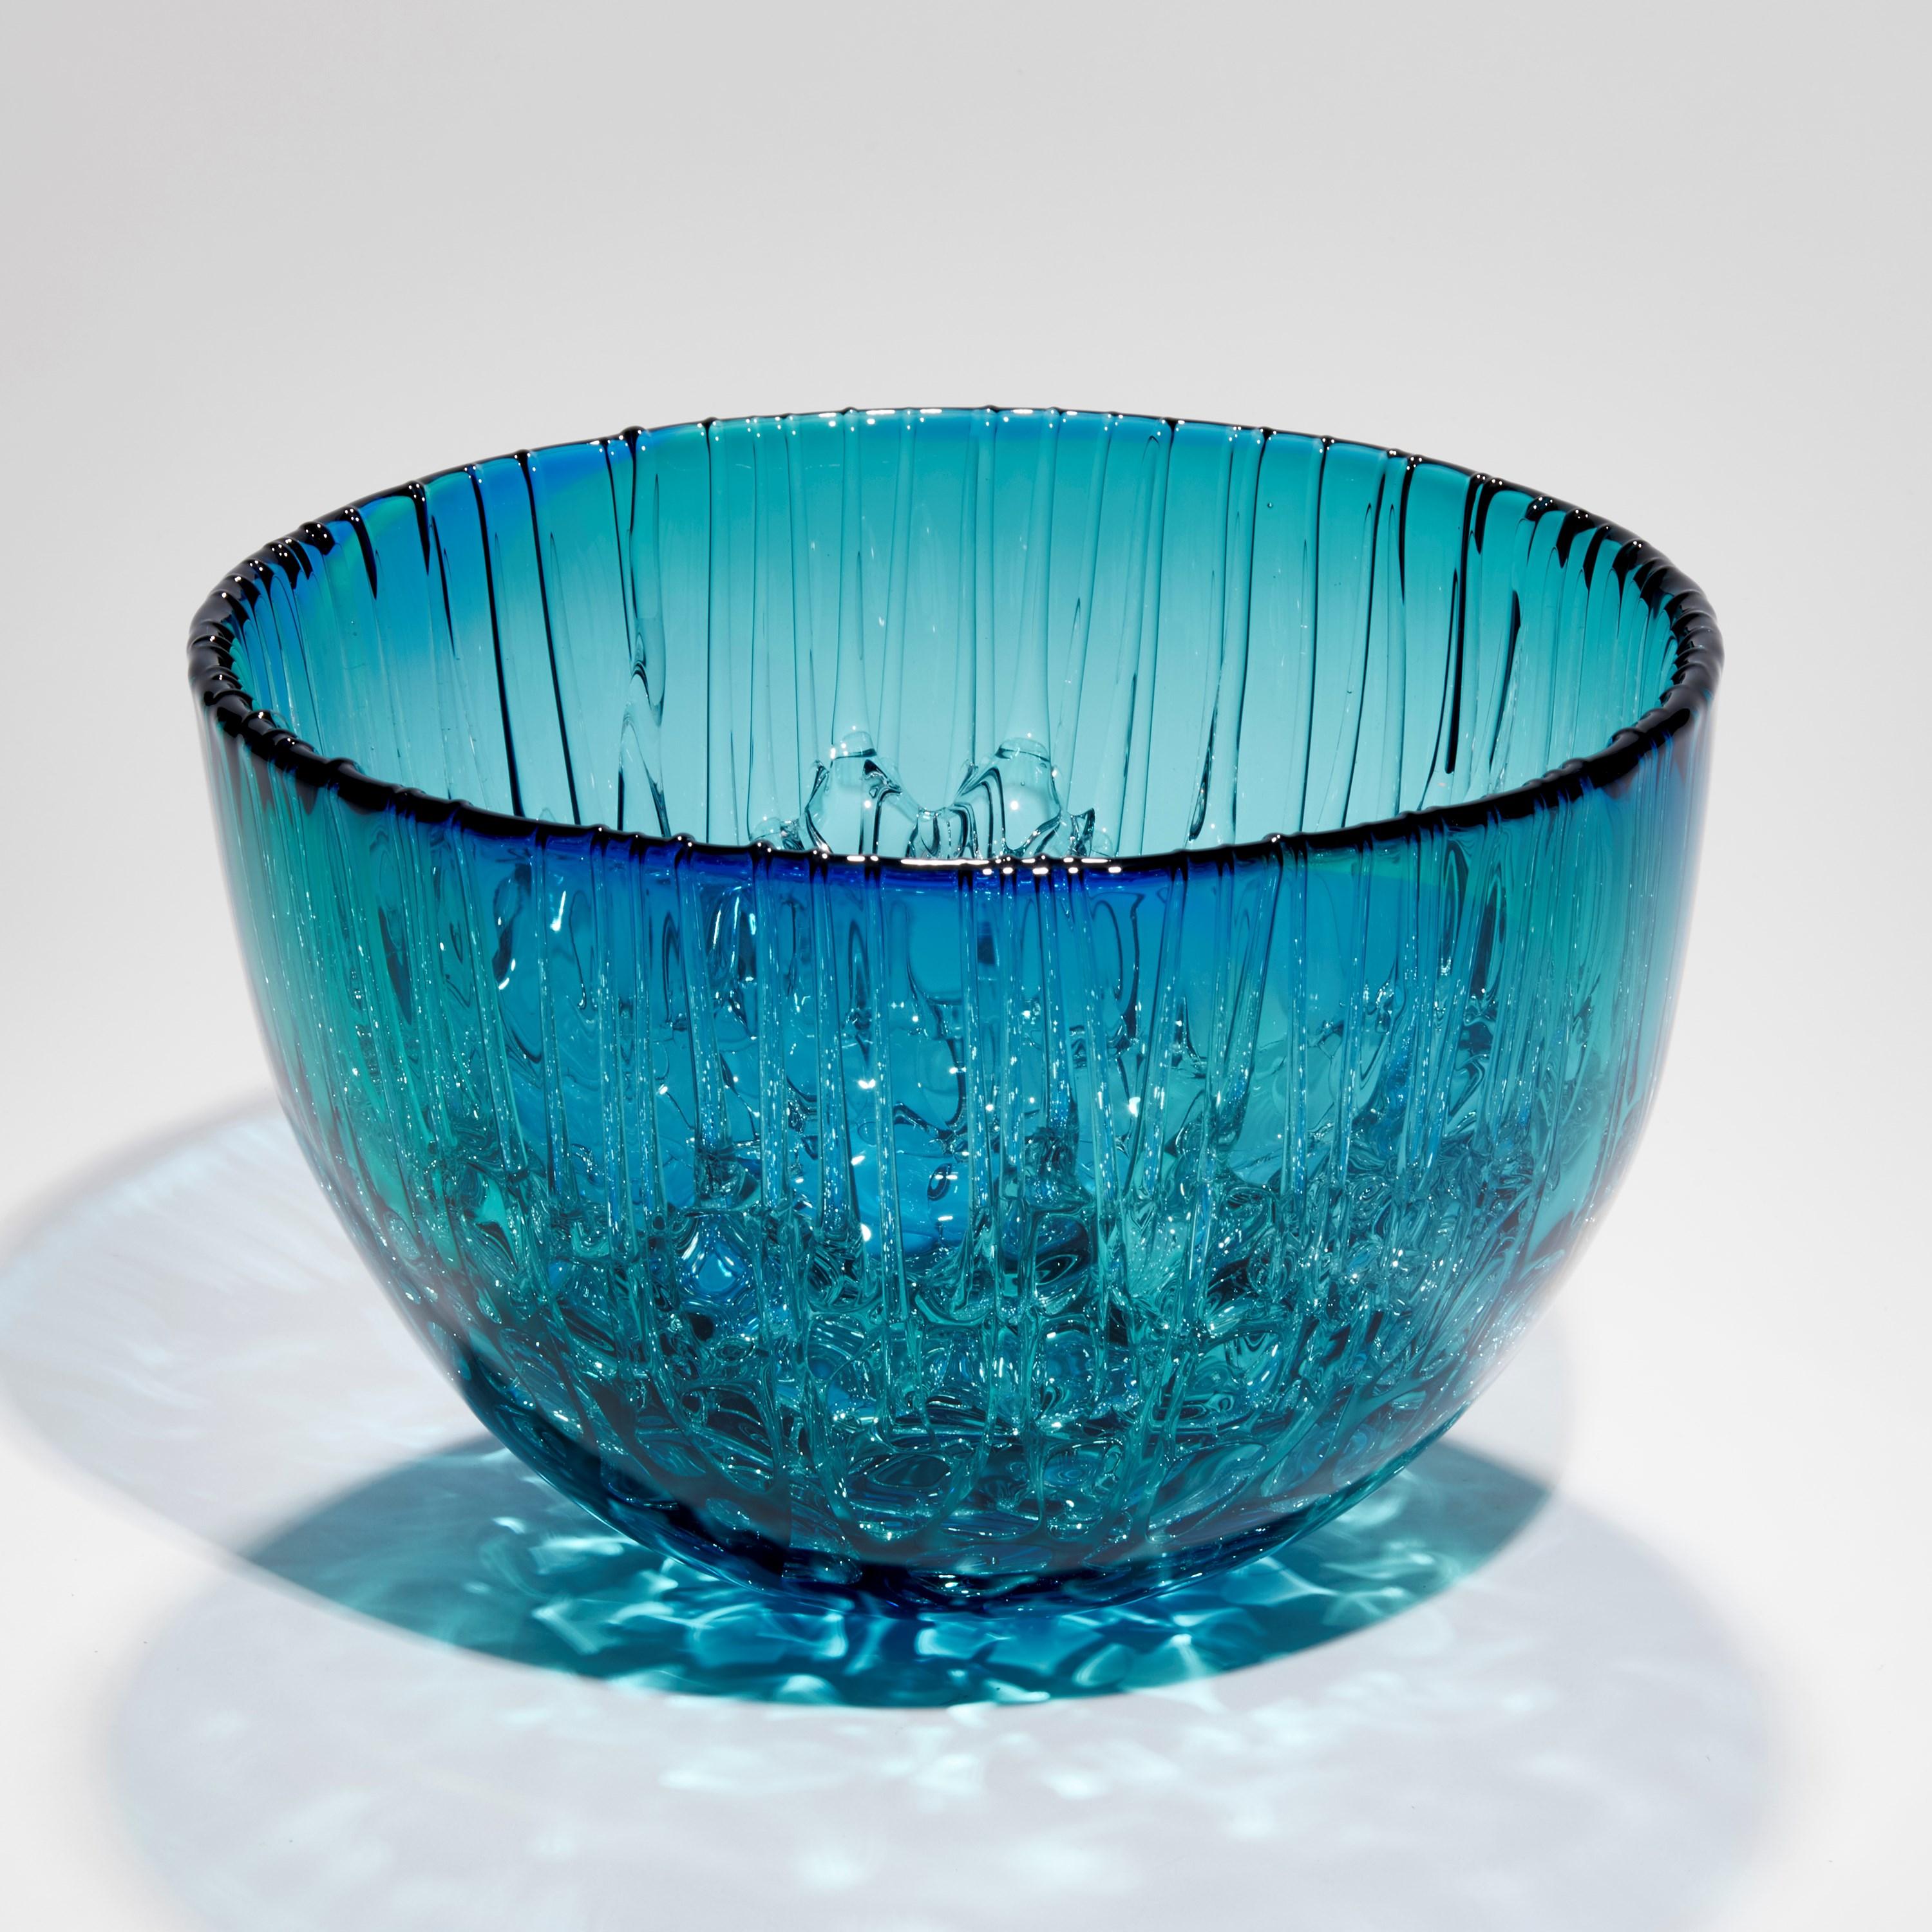 'Cassito in Blue & Green' is a unique handblown and sculpted decorative glass centrepiece by the British artist, Katherine Huskie.

Huskie's work has a strong identity with form, colour and especially pattern, taking inspiration from nature,